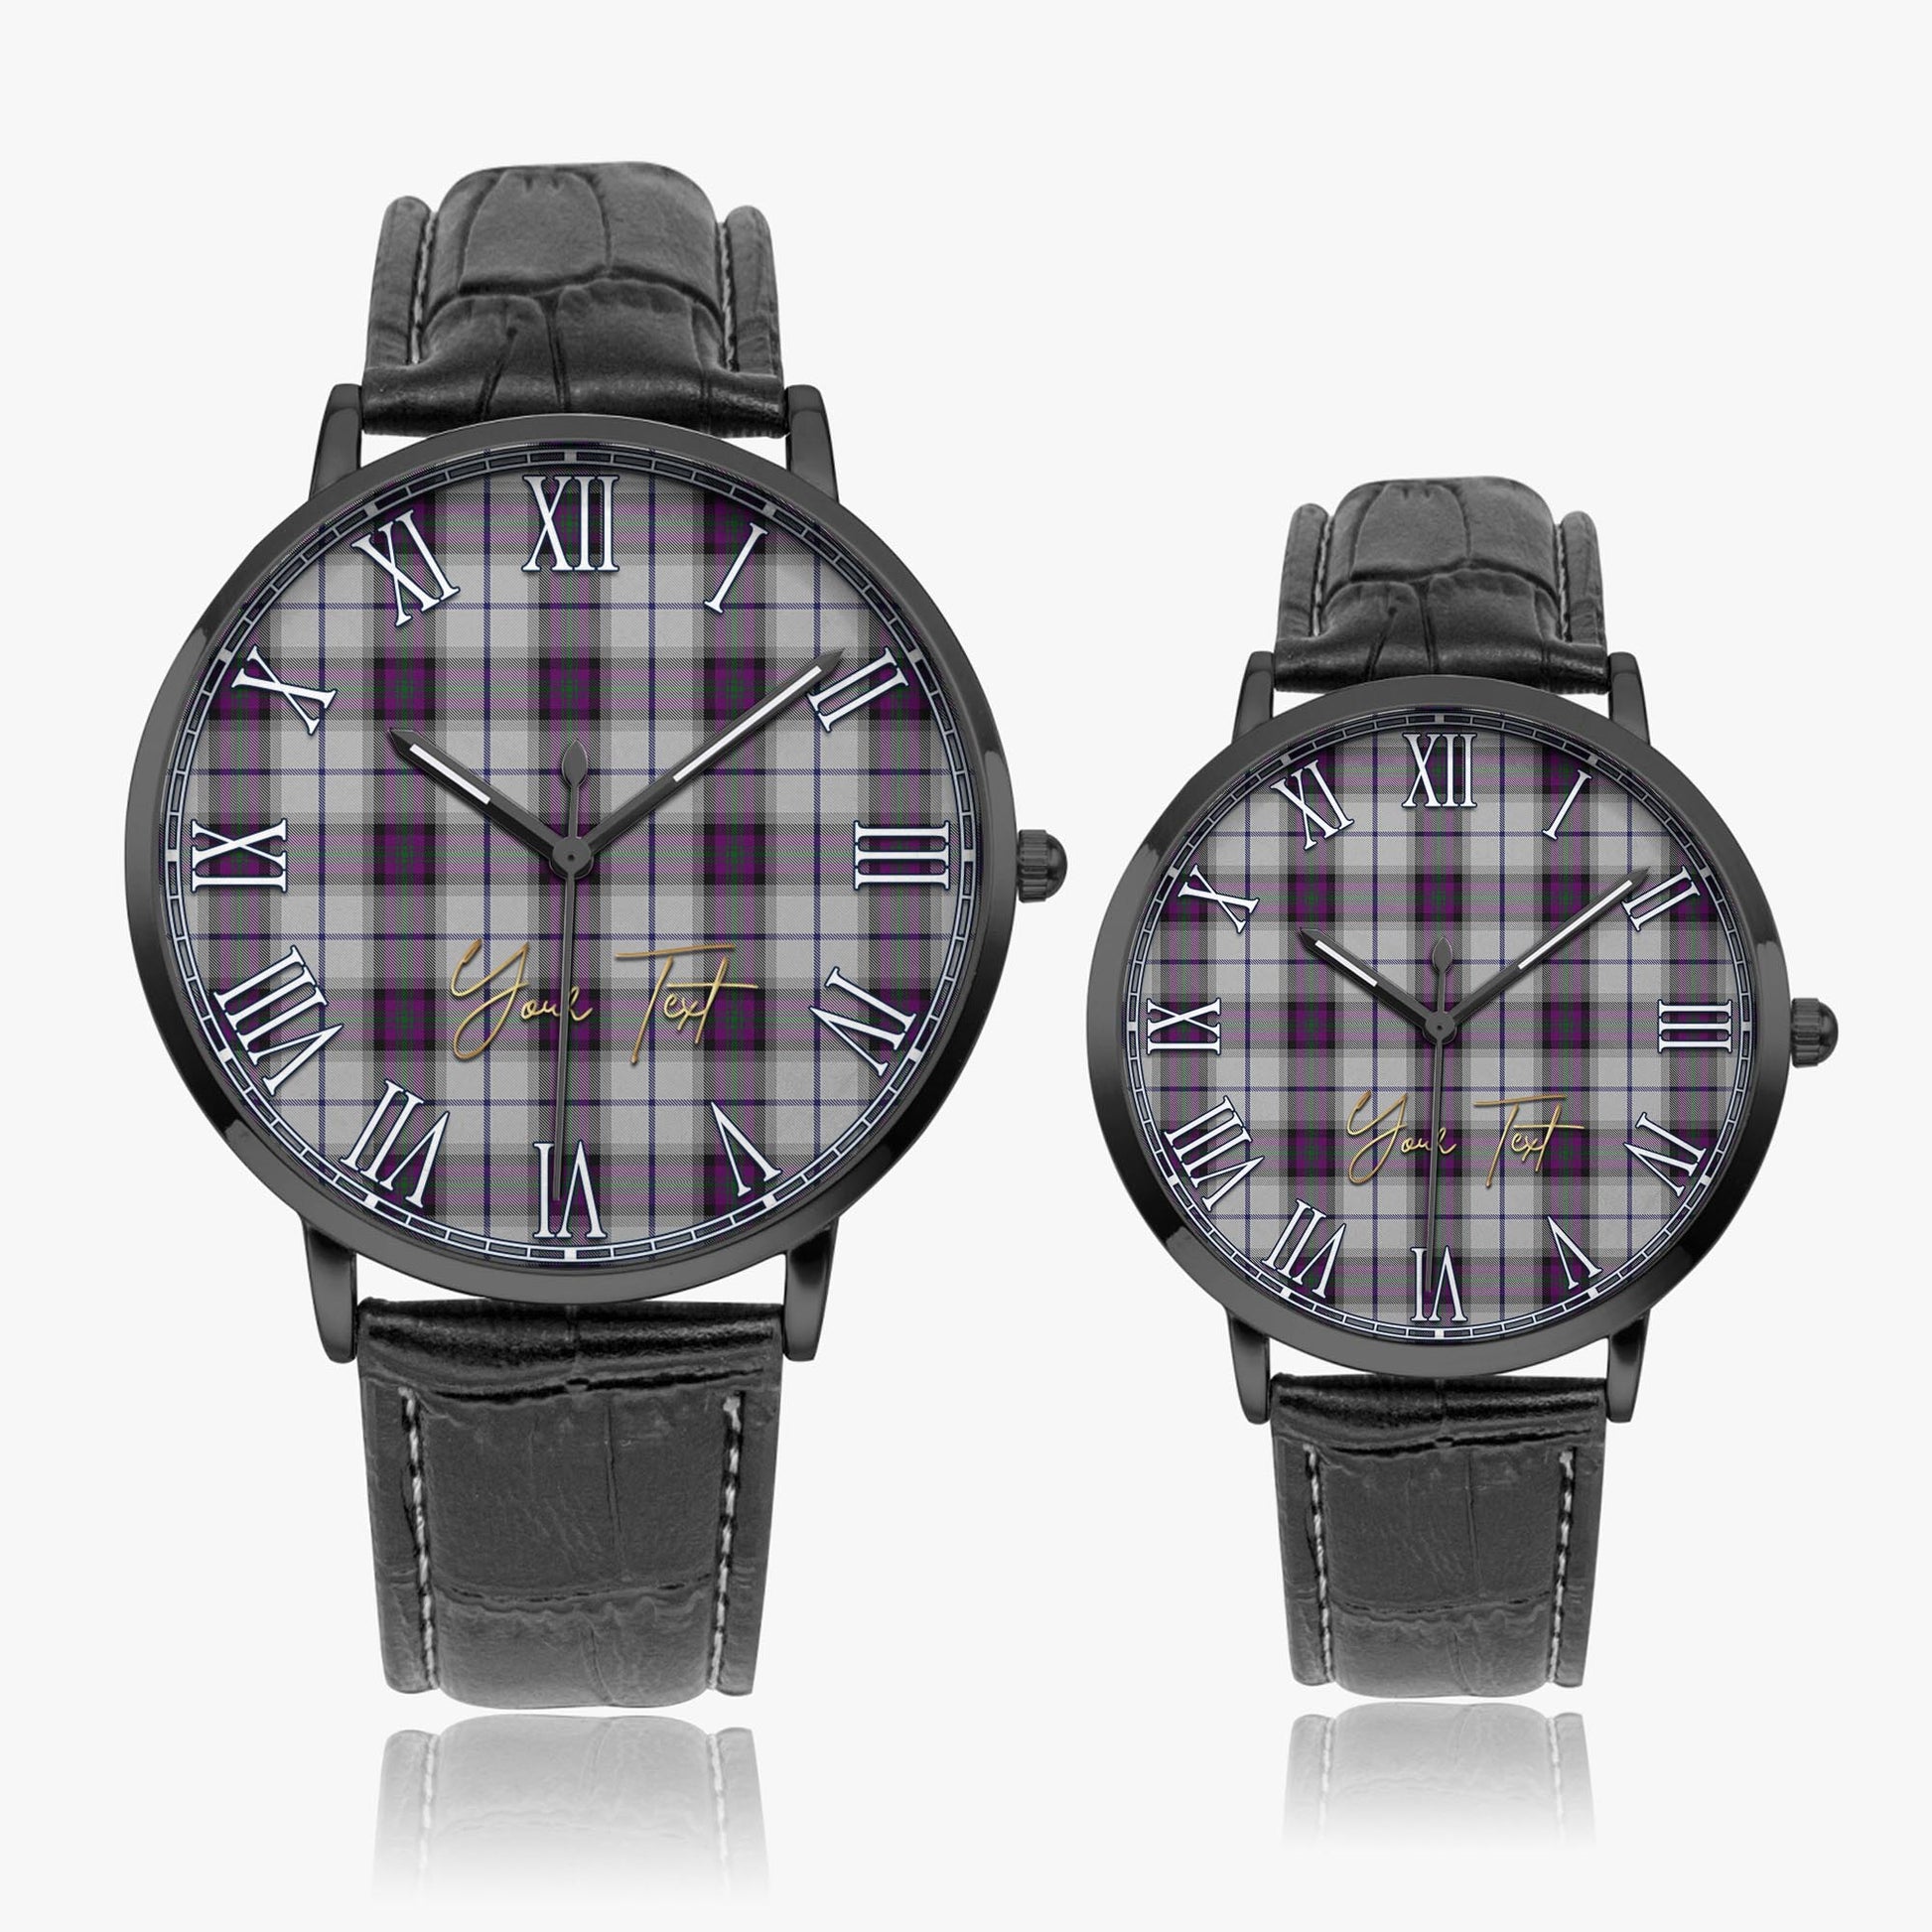 Alexander of Menstry Dress Tartan Personalized Your Text Leather Trap Quartz Watch Ultra Thin Black Case With Black Leather Strap - Tartanvibesclothing